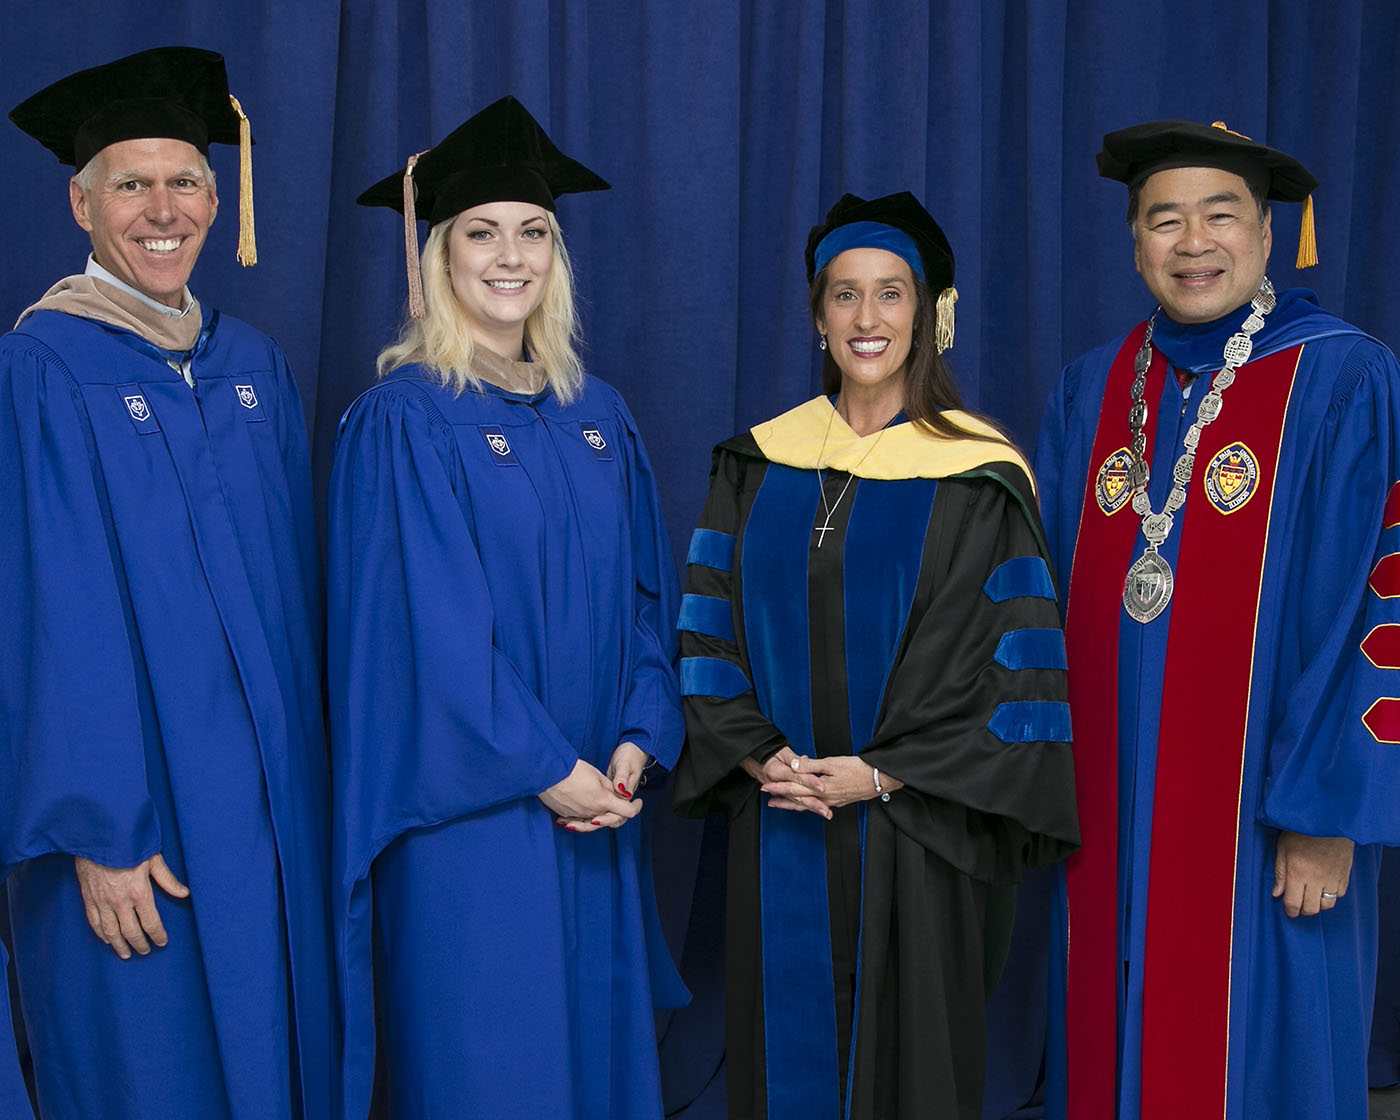 James T. Ryan III, chair of the board of trustees; Alyssa Poniatowski, Class of 2018 student speaker; Misty M. Johanson, dean of the Driehaus College of Business; and A. Gabriel Esteban, Ph.D., president of DePaul at the Wintrust Arena